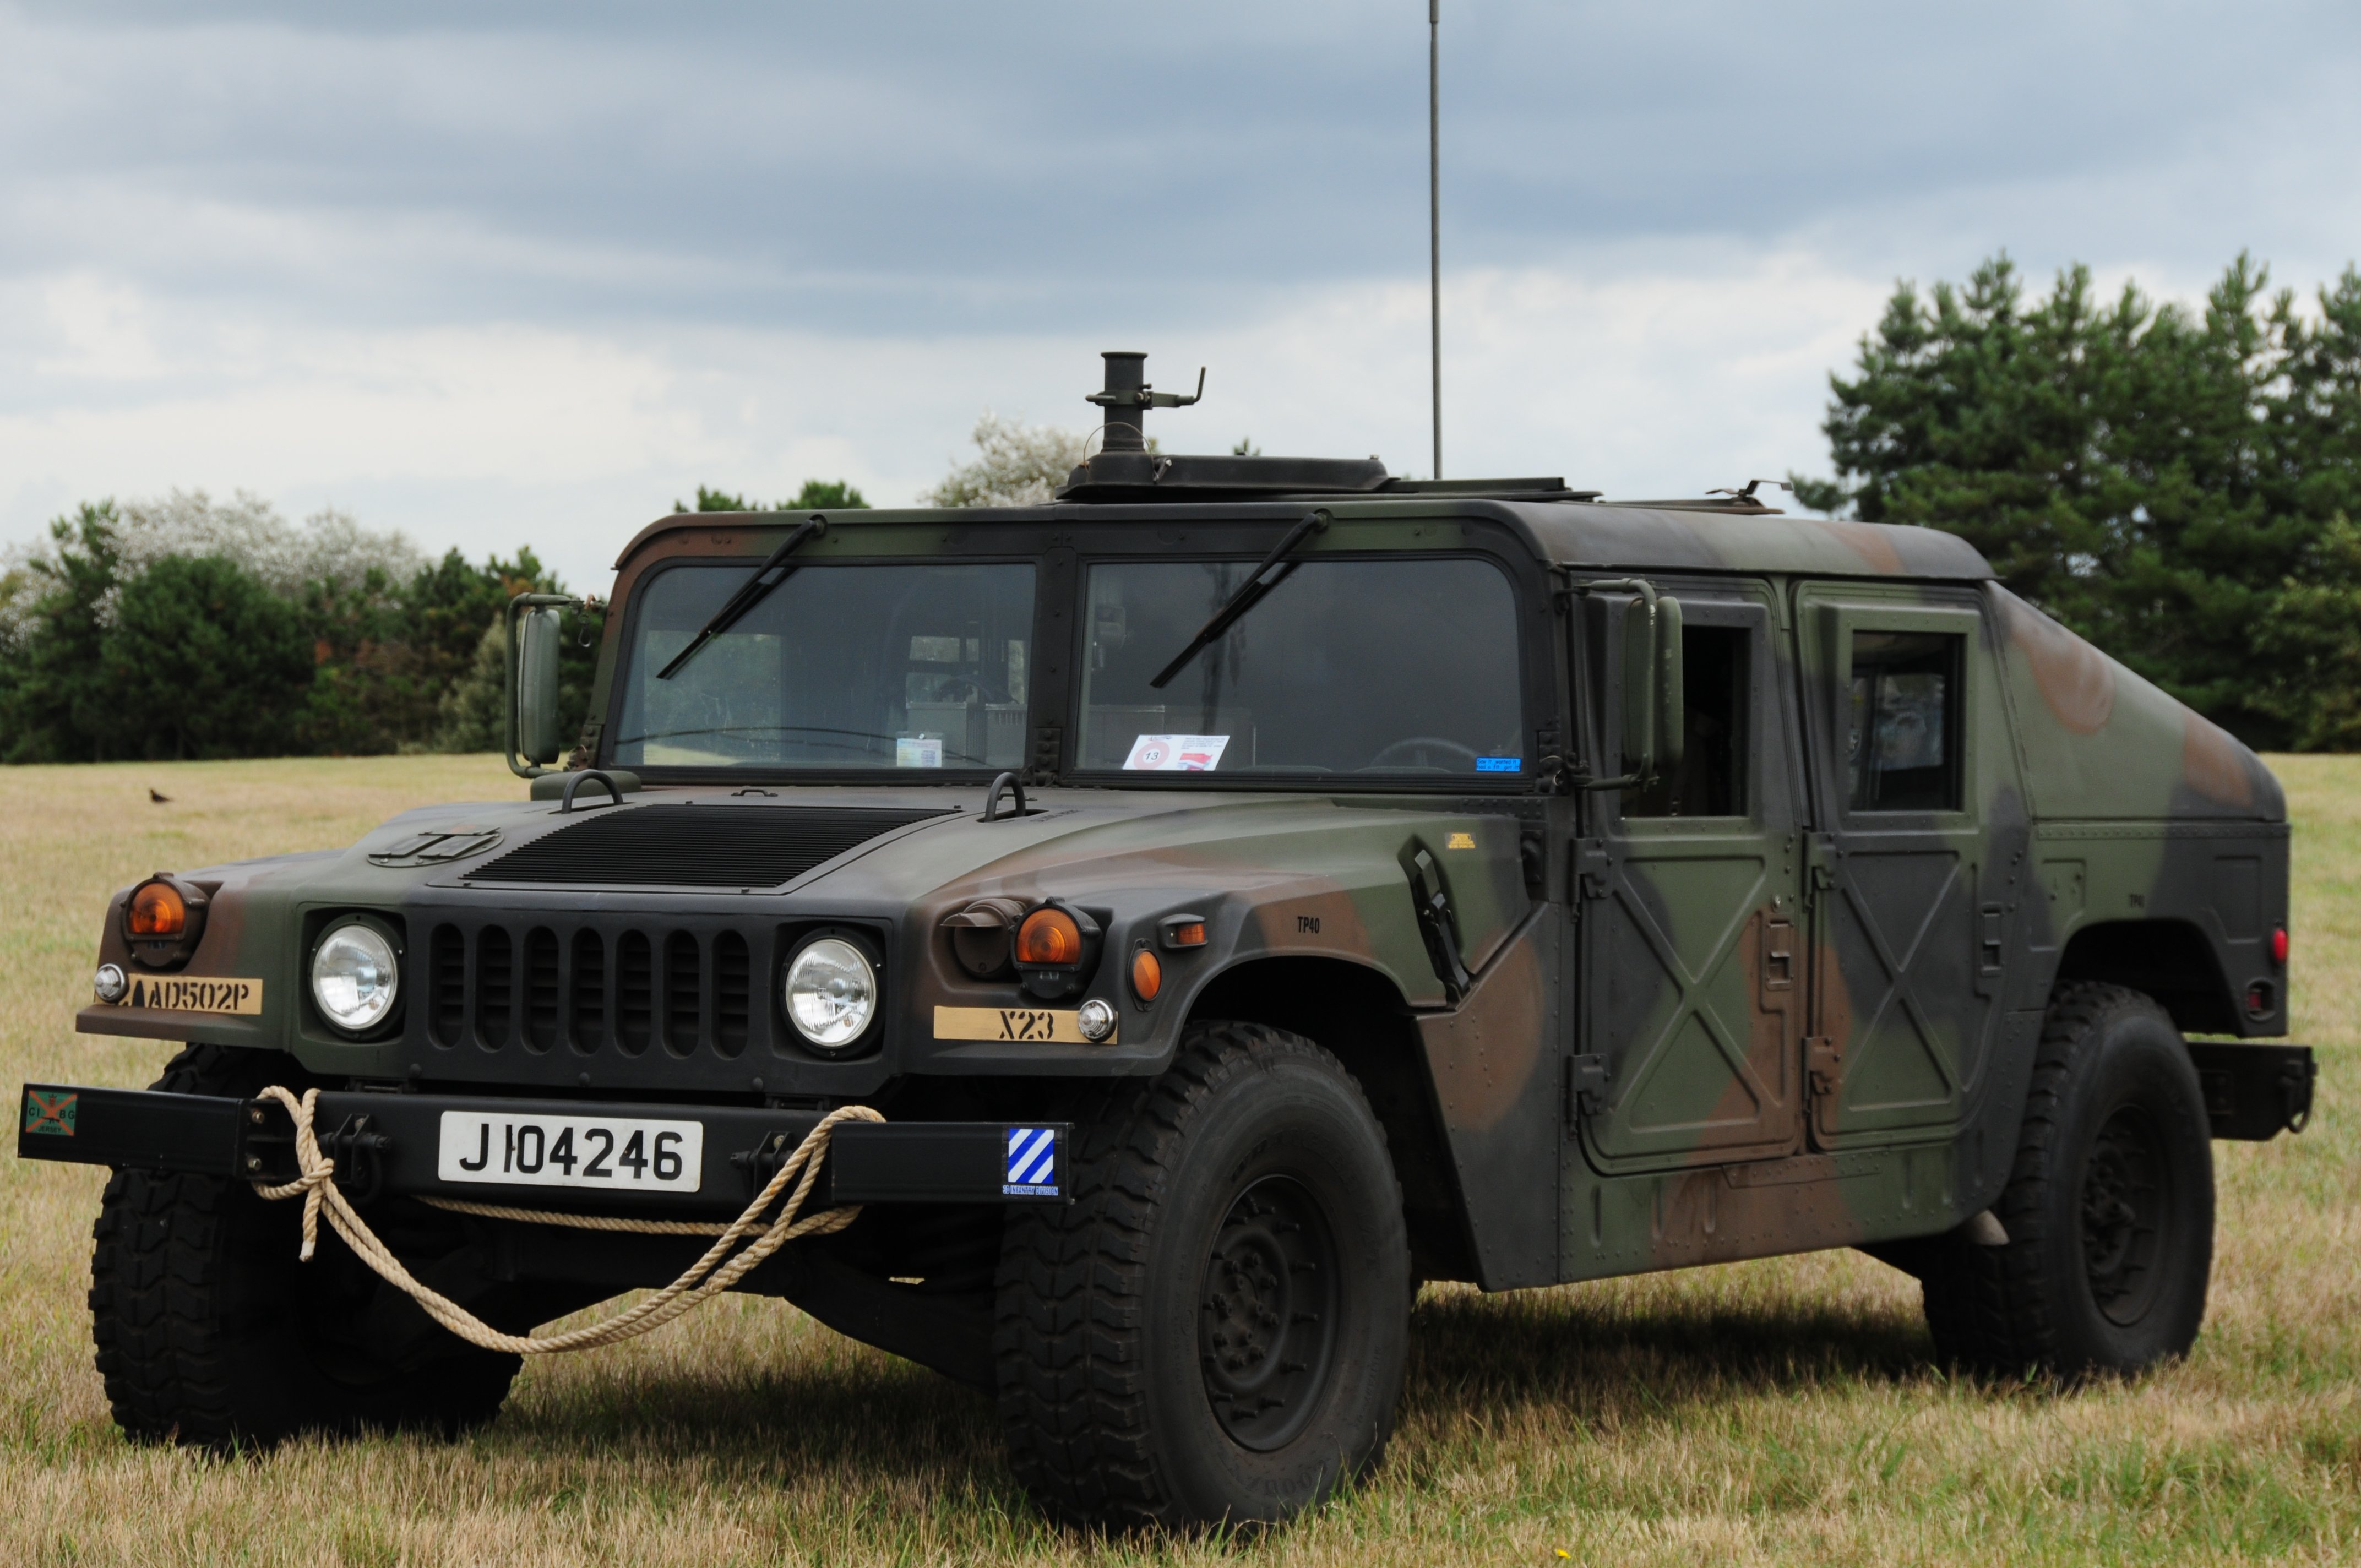 A defence land vehicle parked on the grass, representing ex-military jobs abroad.